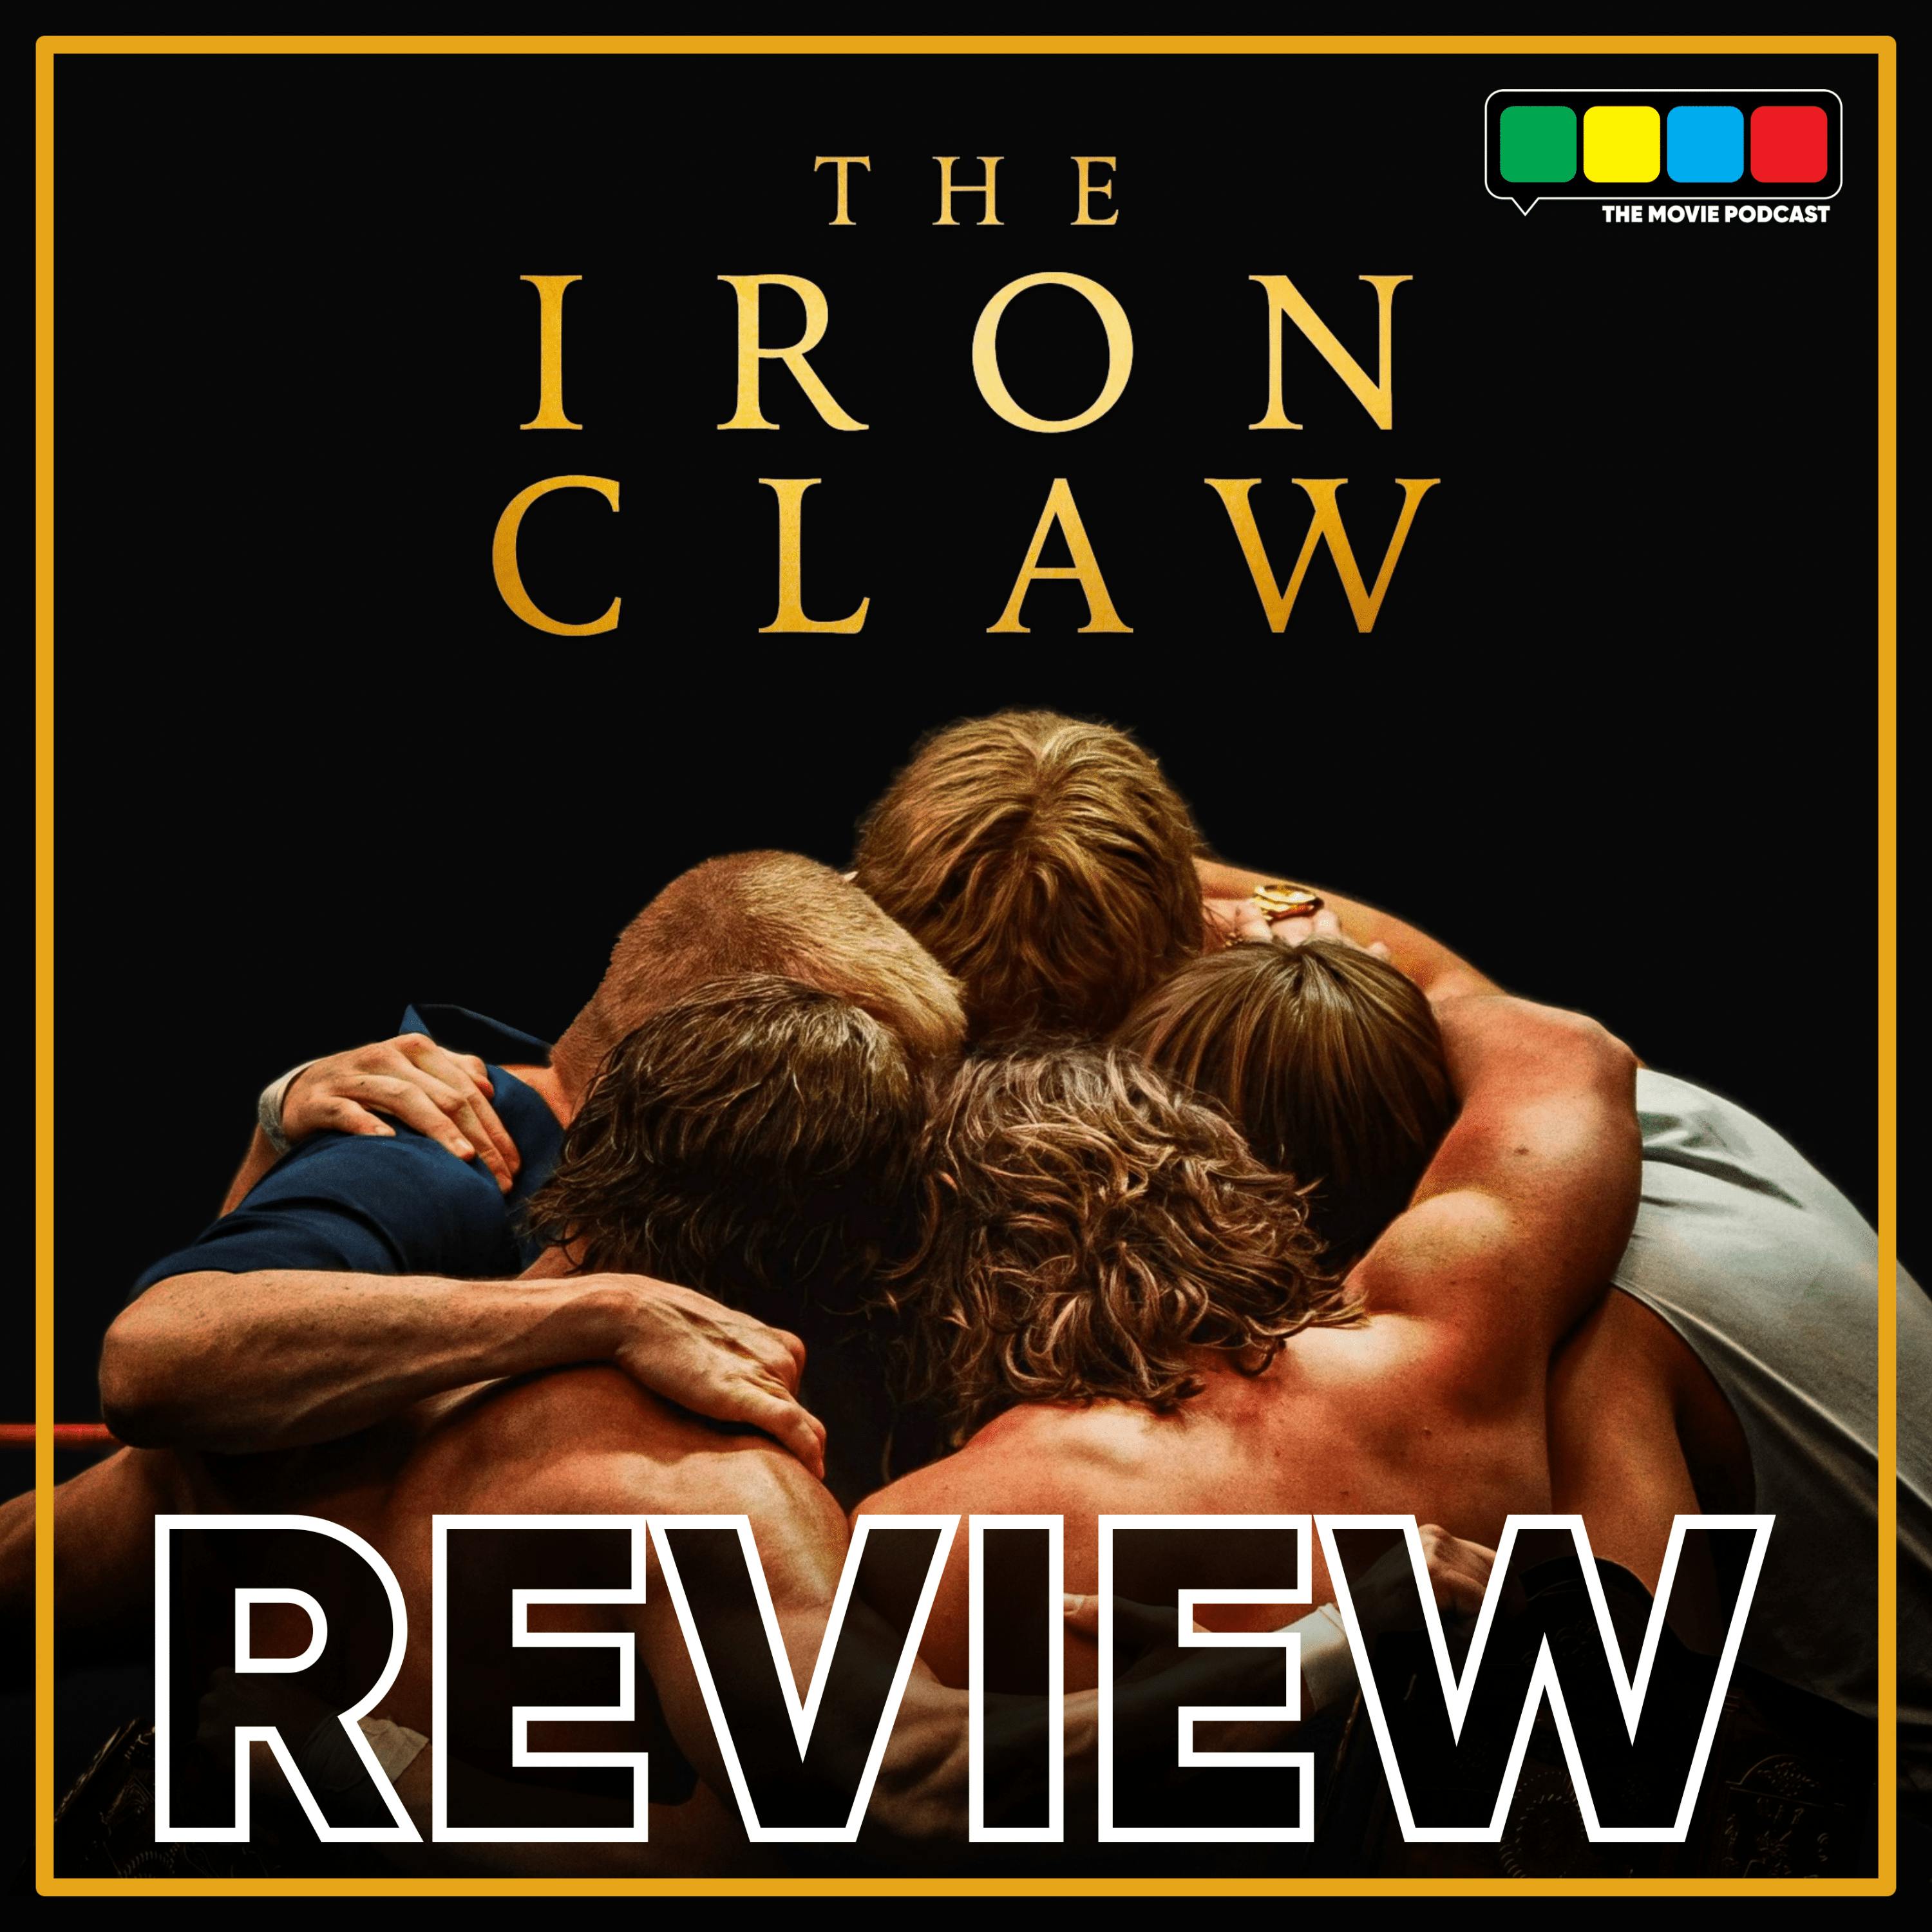 The Iron Claw Review